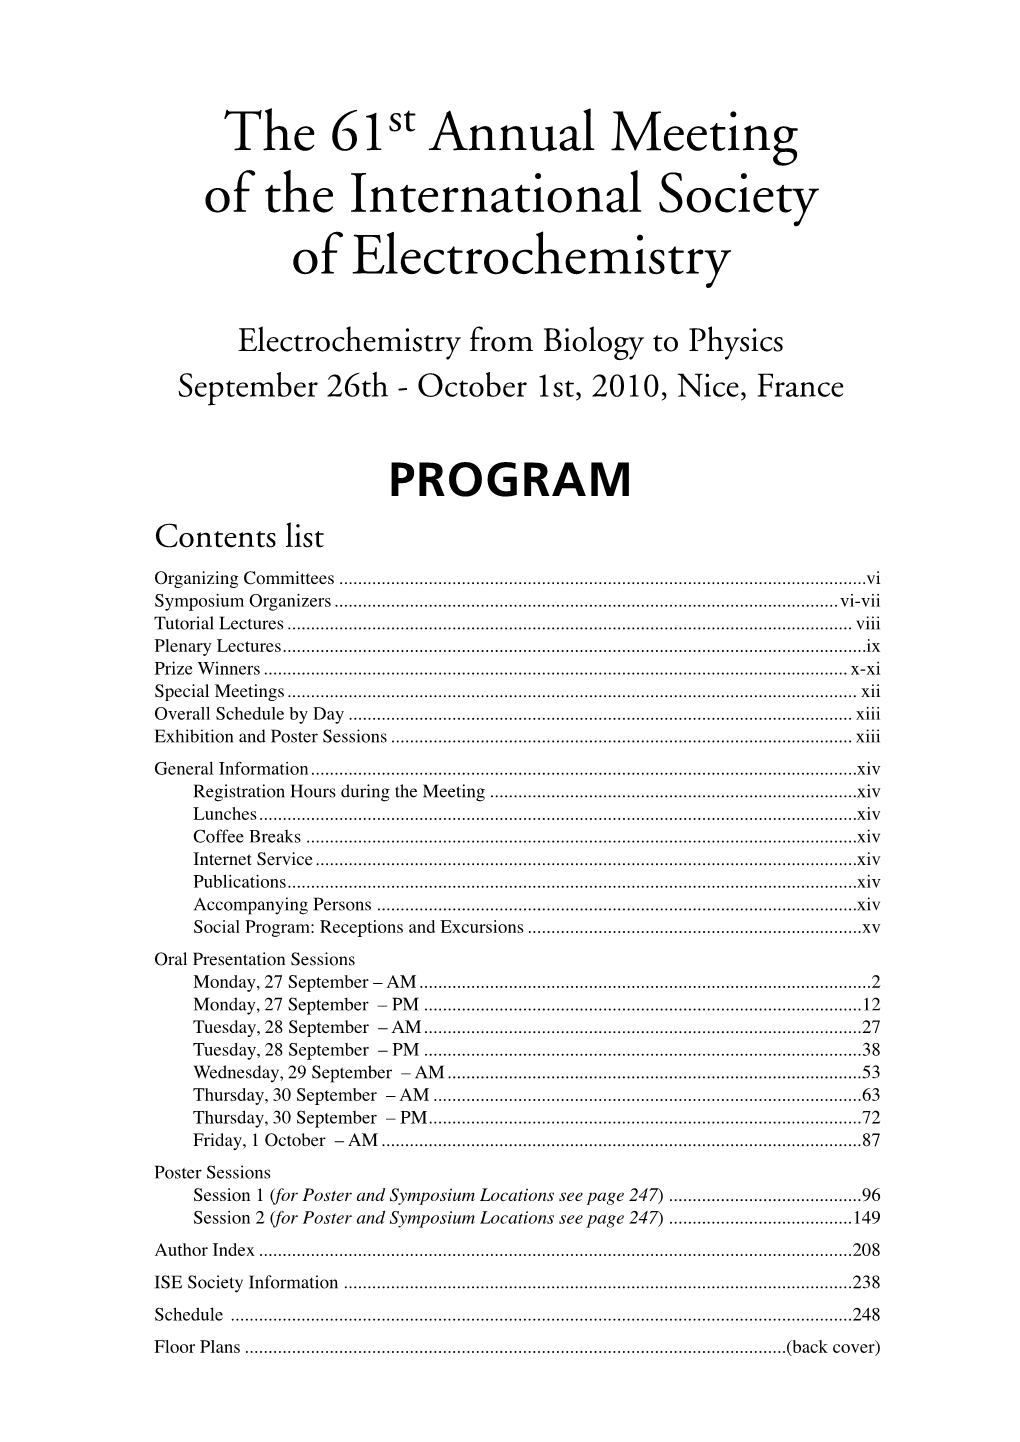 Program of the 61St Annual Meeting of the International Society of Electrochemistry Iii the 61St Annual Meeting of the International Society of Electrochemistry